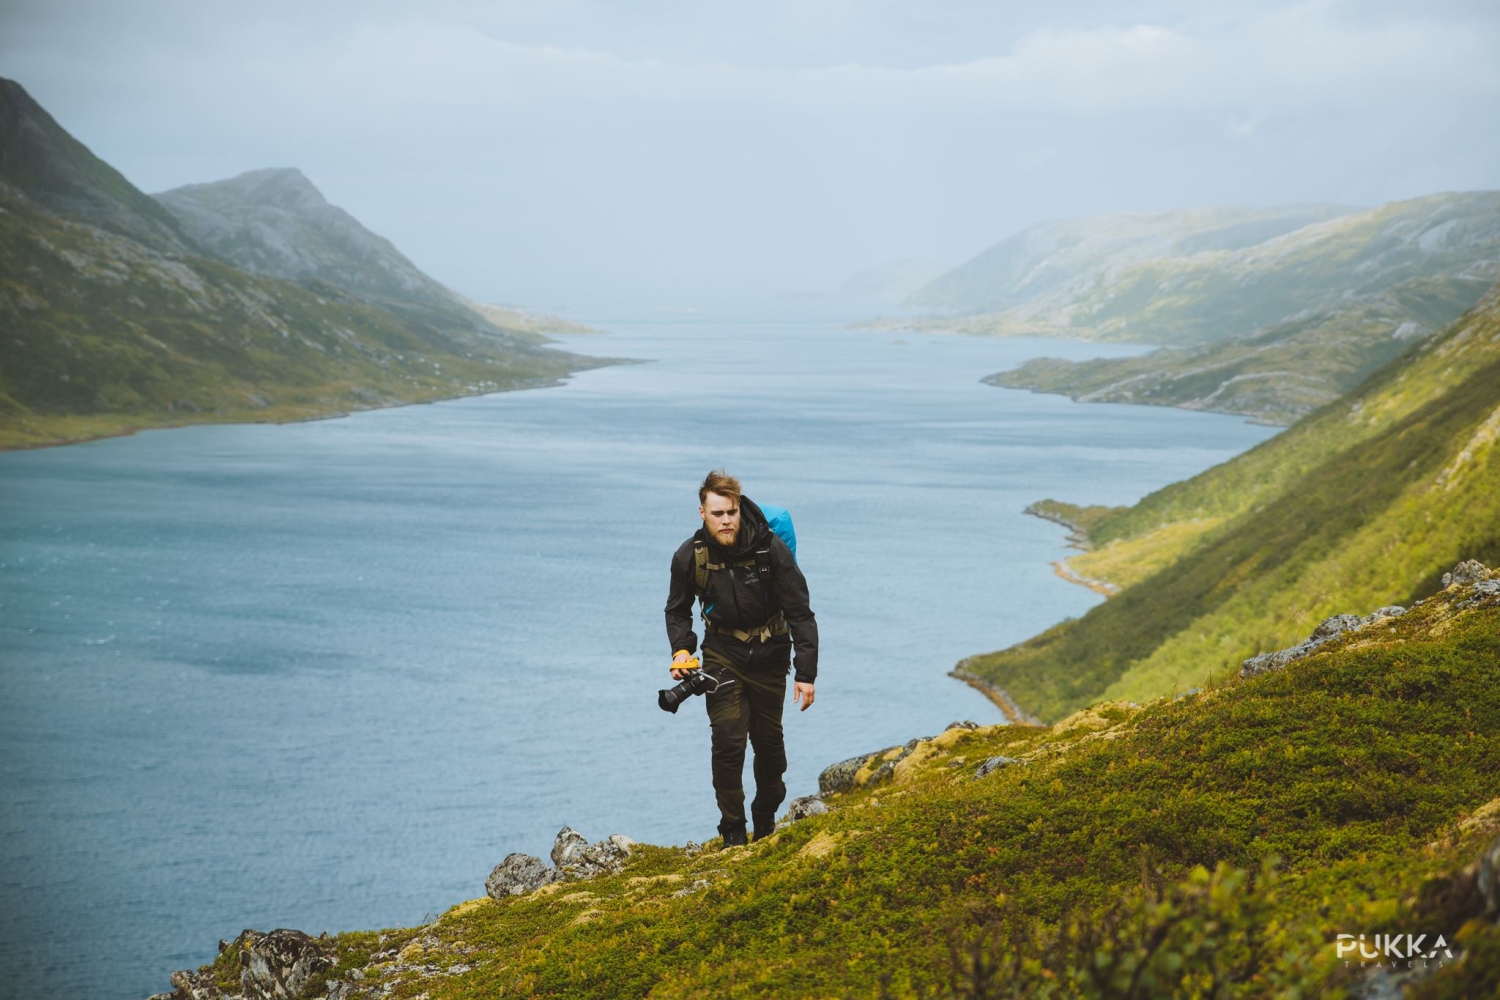 Man hiking on the mountain, fjord in the background